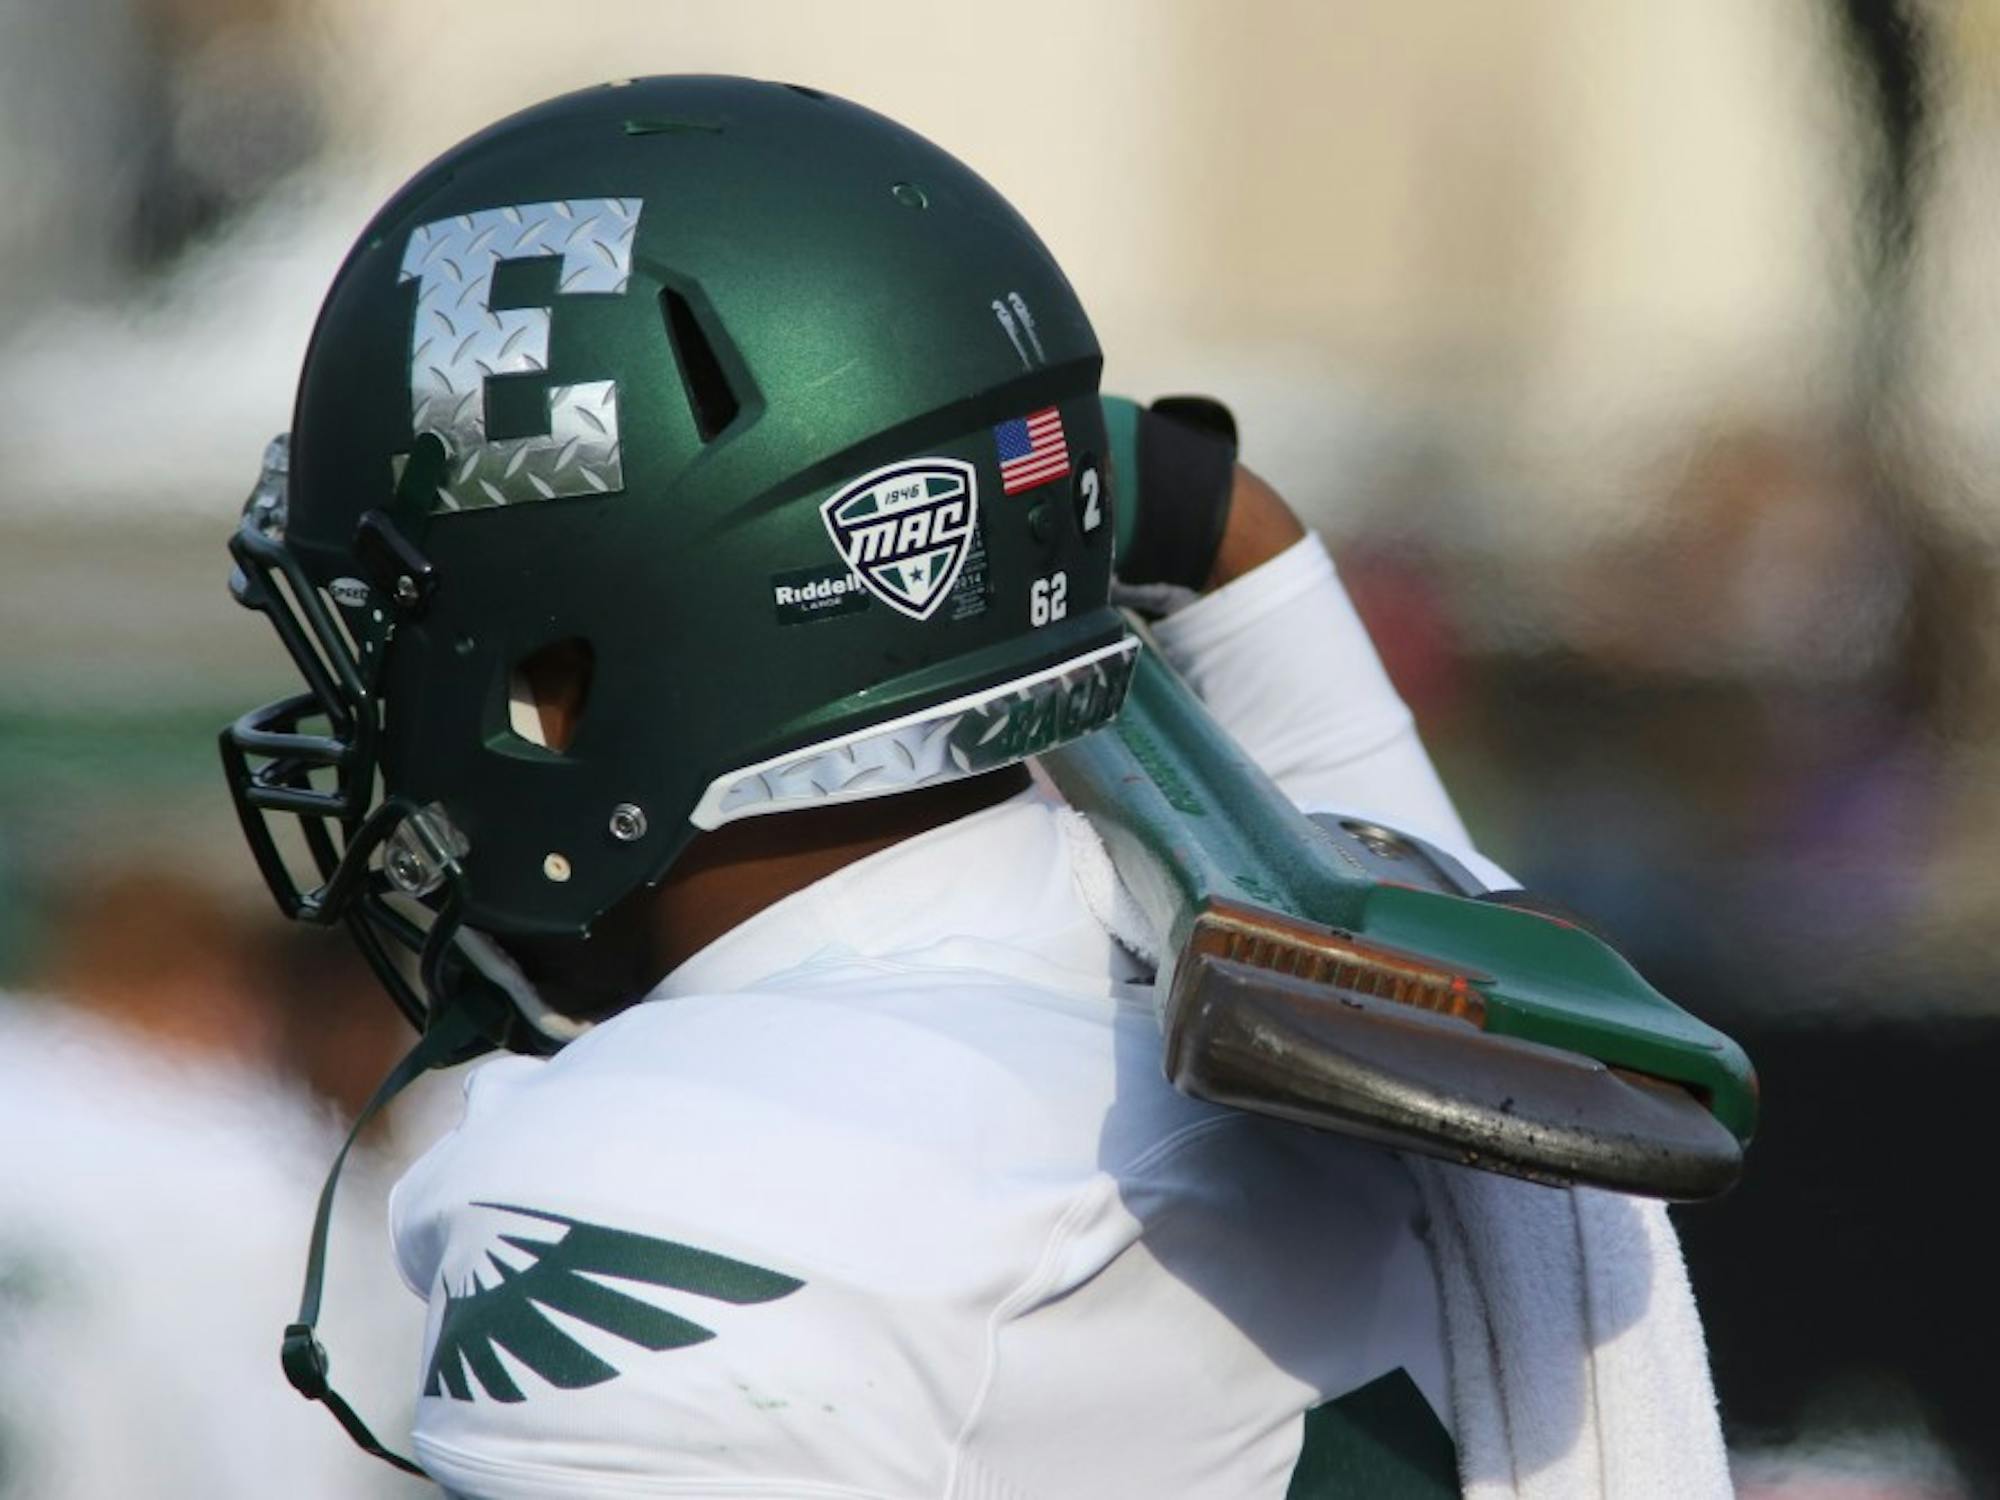 Eastern Michigan offensive lineman Ka'John Armstrong holds the wrench in the Eagles 51-7 loss to Western Michigan Saturday afternoon in Kalamazoo.